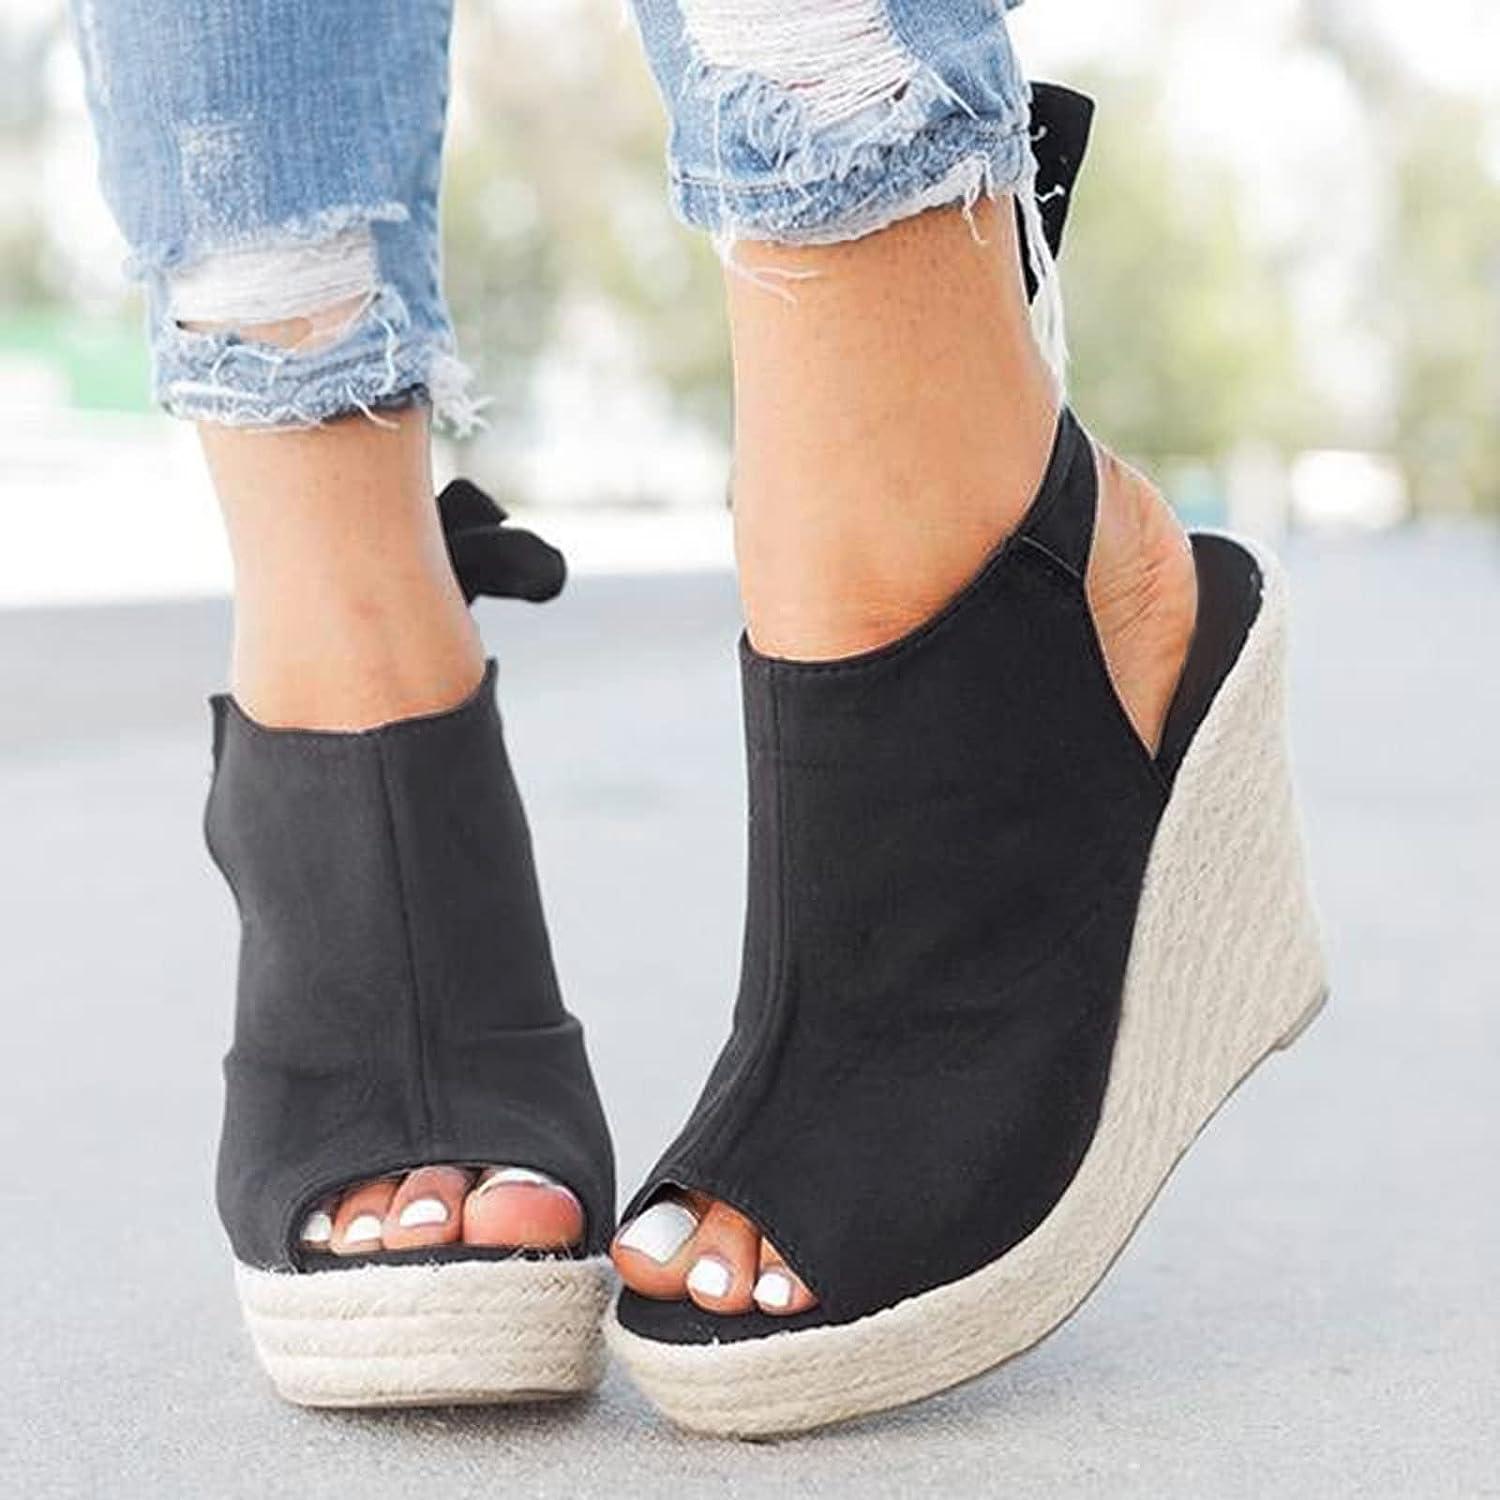 Wedge Sandals for Women Casual Summer Open Toe Buckle Ankle Strap